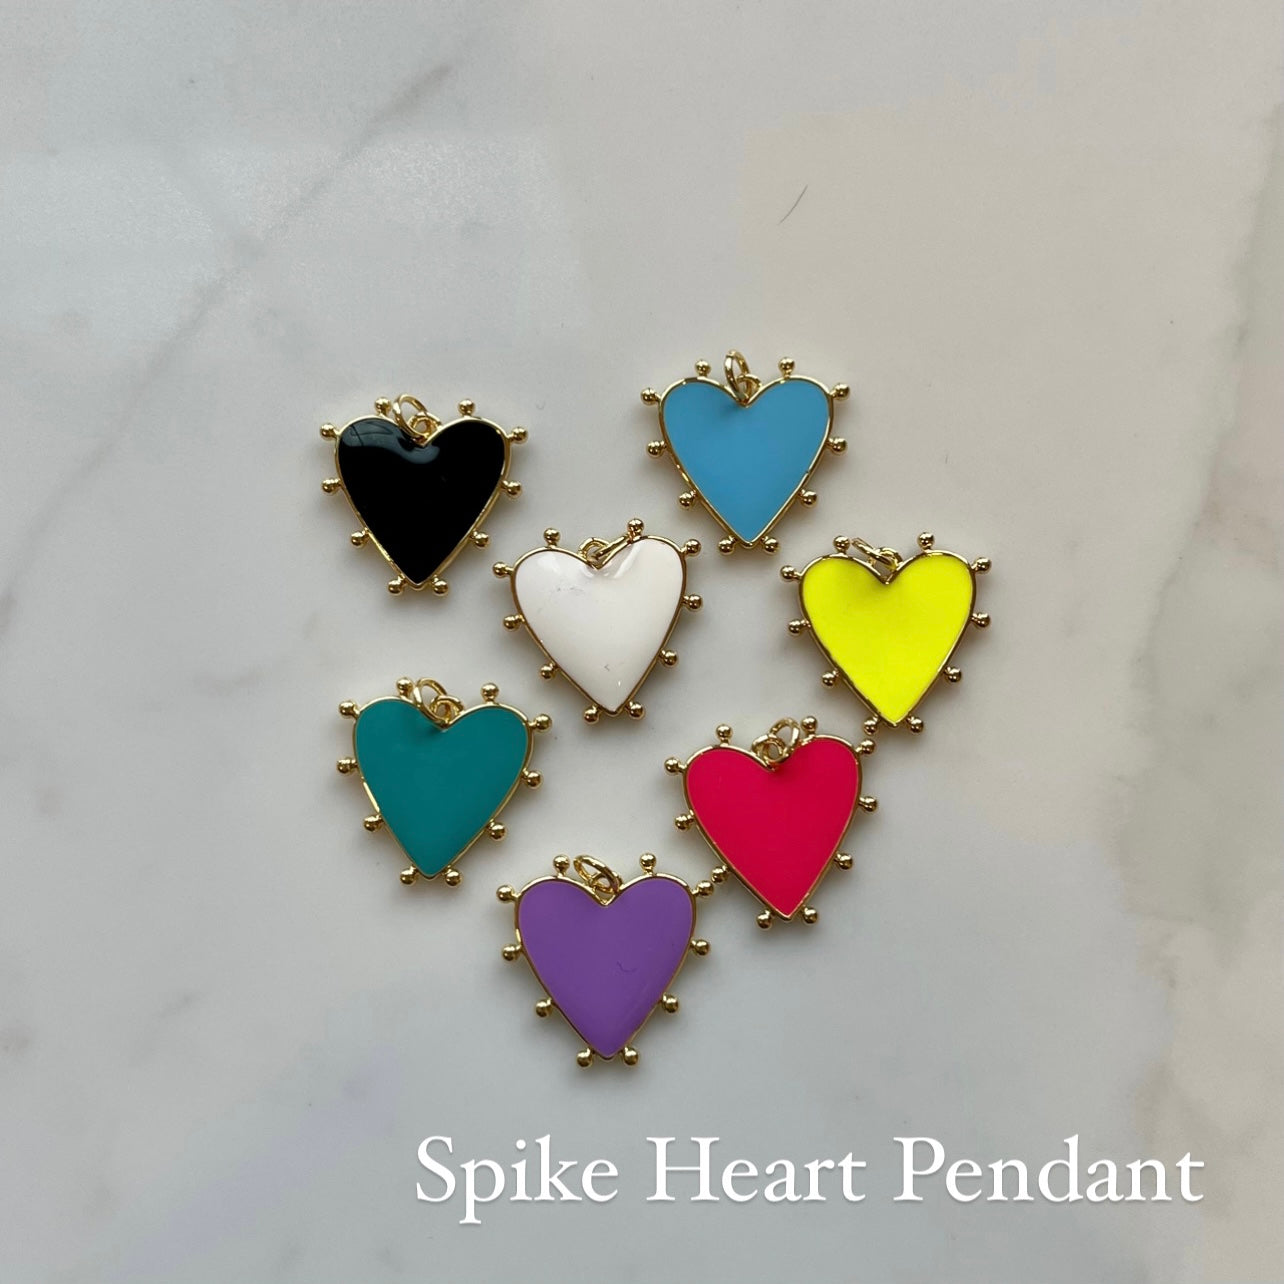 Spike Heart Pendant for the Necklace Kit